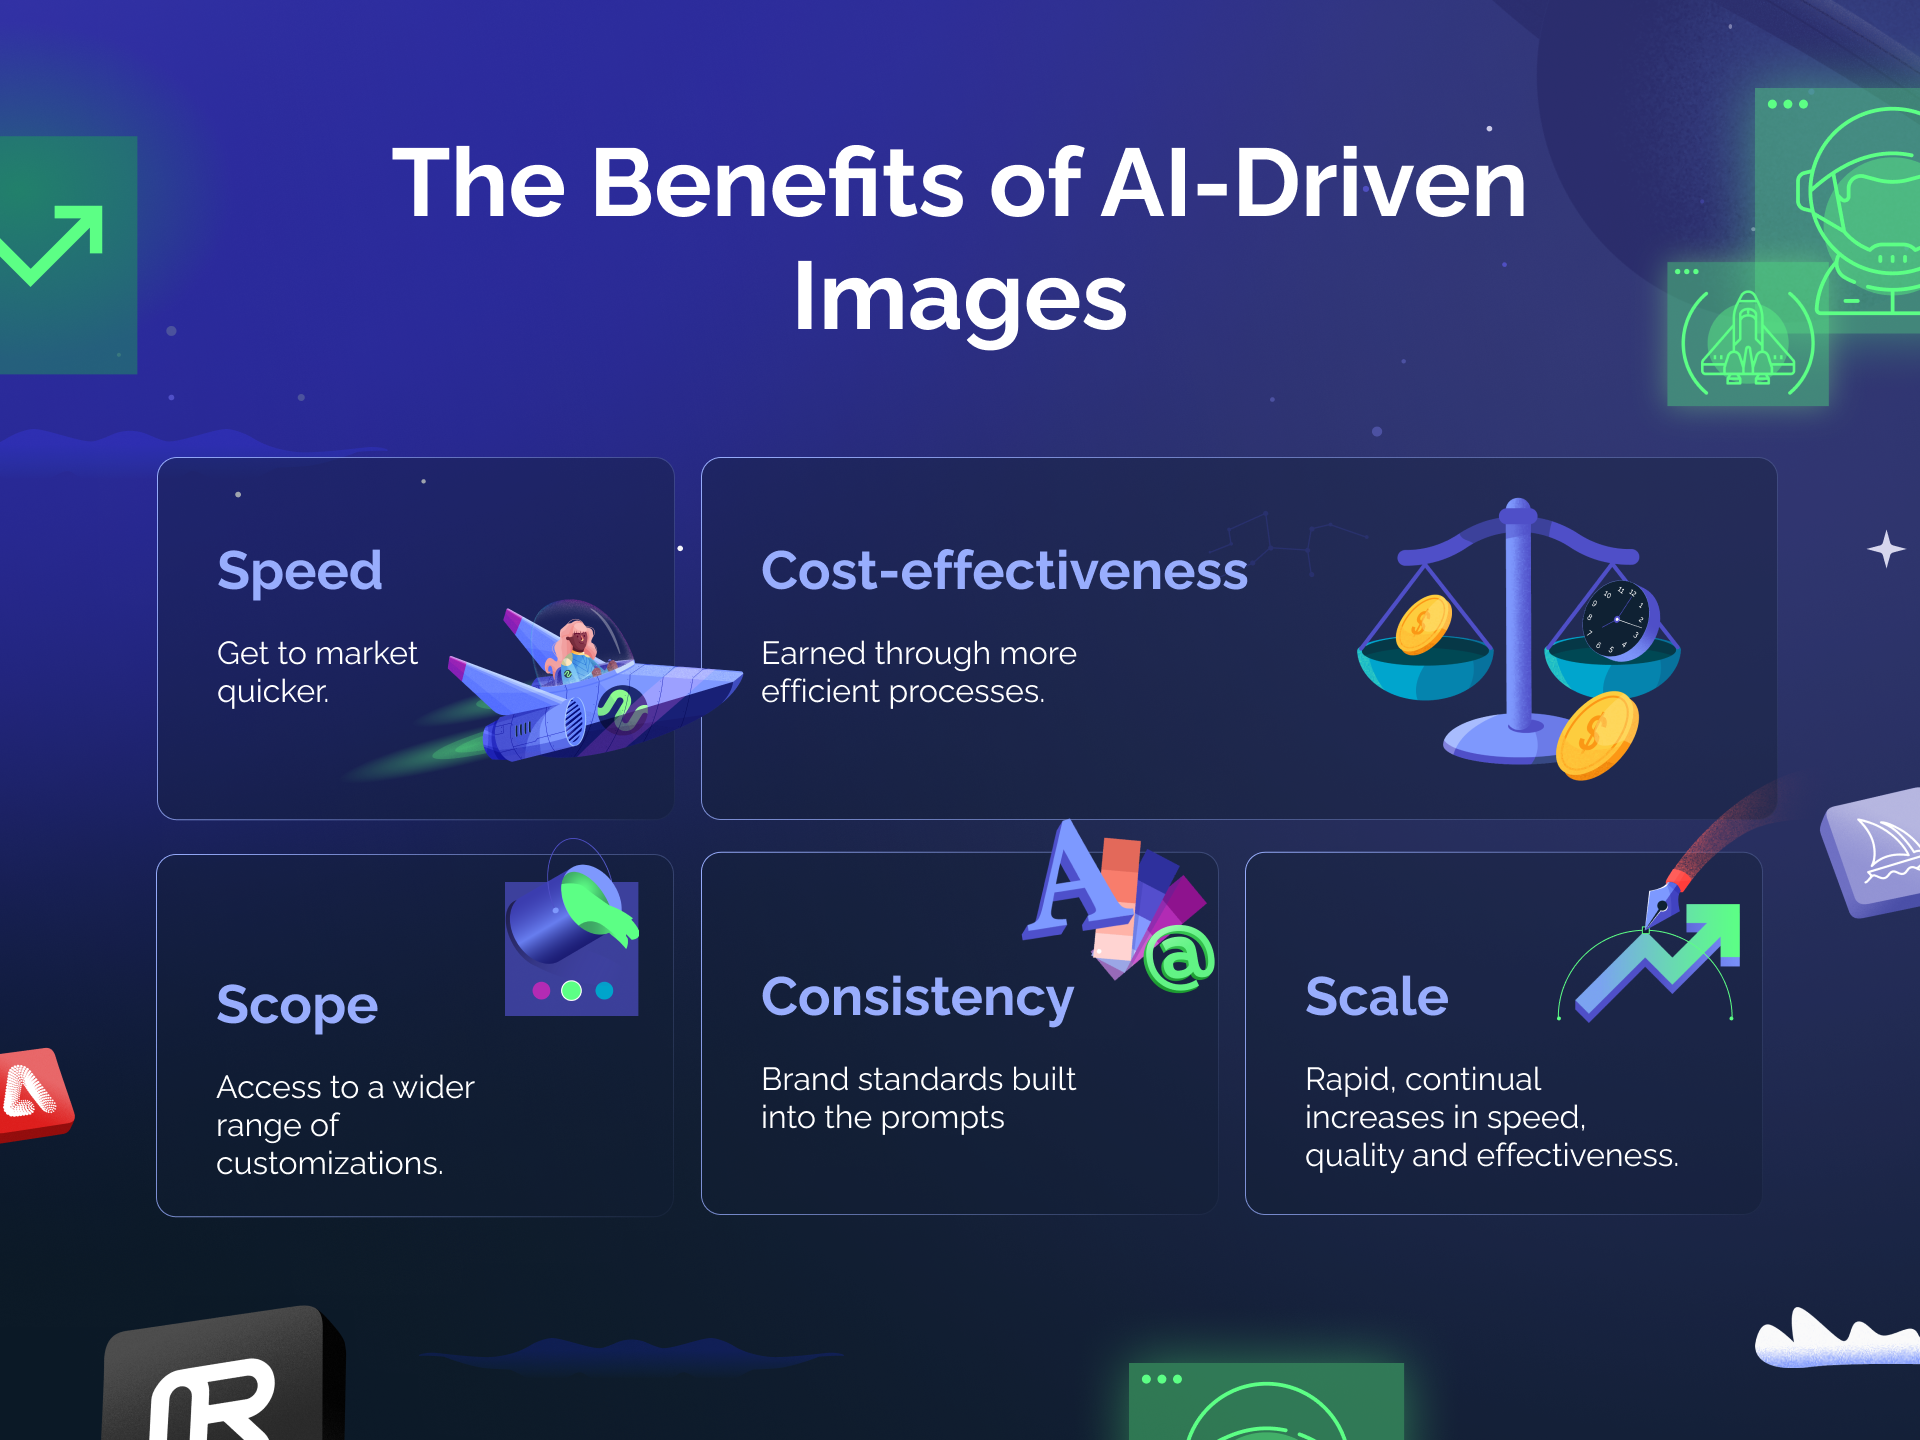 An infographic that lists the benefits of AI-generated images: Speed. Get to market quicker  Cost-effectiveness. Earned through more efficient processes.  Scope. Access to a wider range of customizations.  Consistency. Brand standards built into the prompting.  Scale. Rapid, continual increases in speed, quality and effectivenes